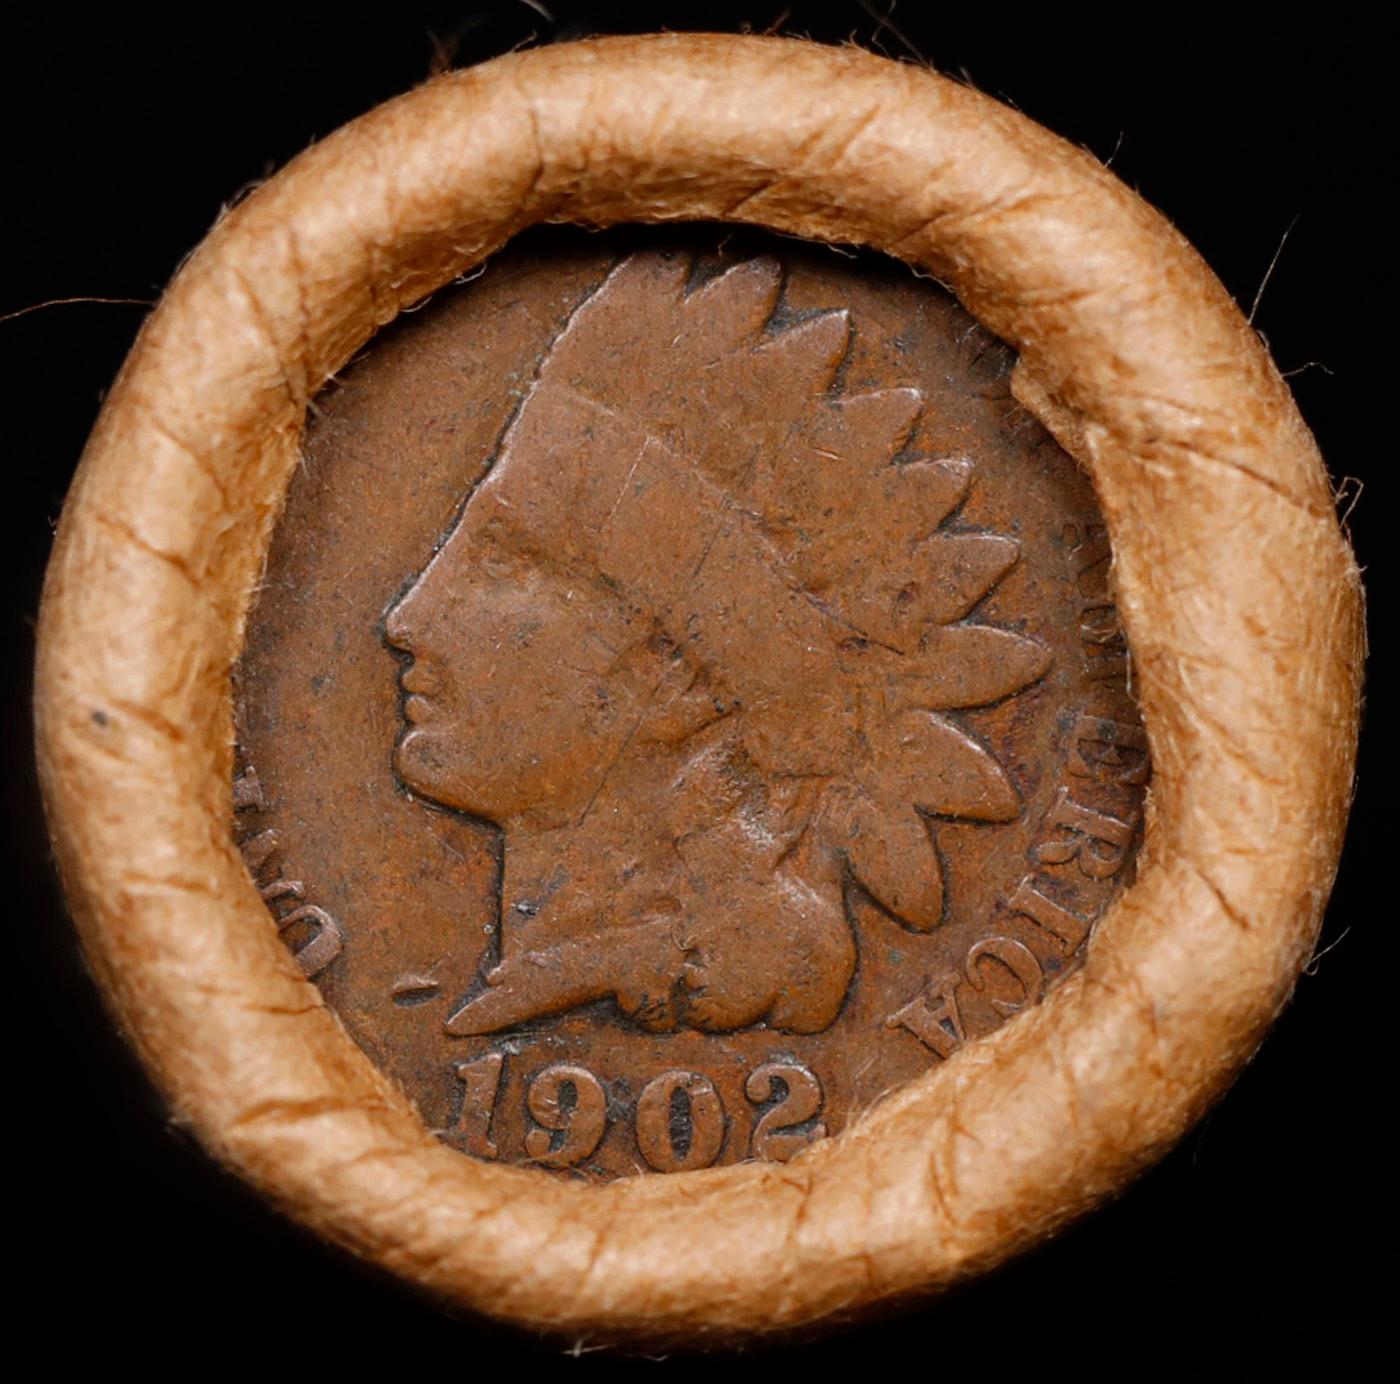 Lincoln Wheat Cent 1c Mixed Roll Orig Brandt McDonalds Wrapper, 1919-d end, 1902 Indian other end